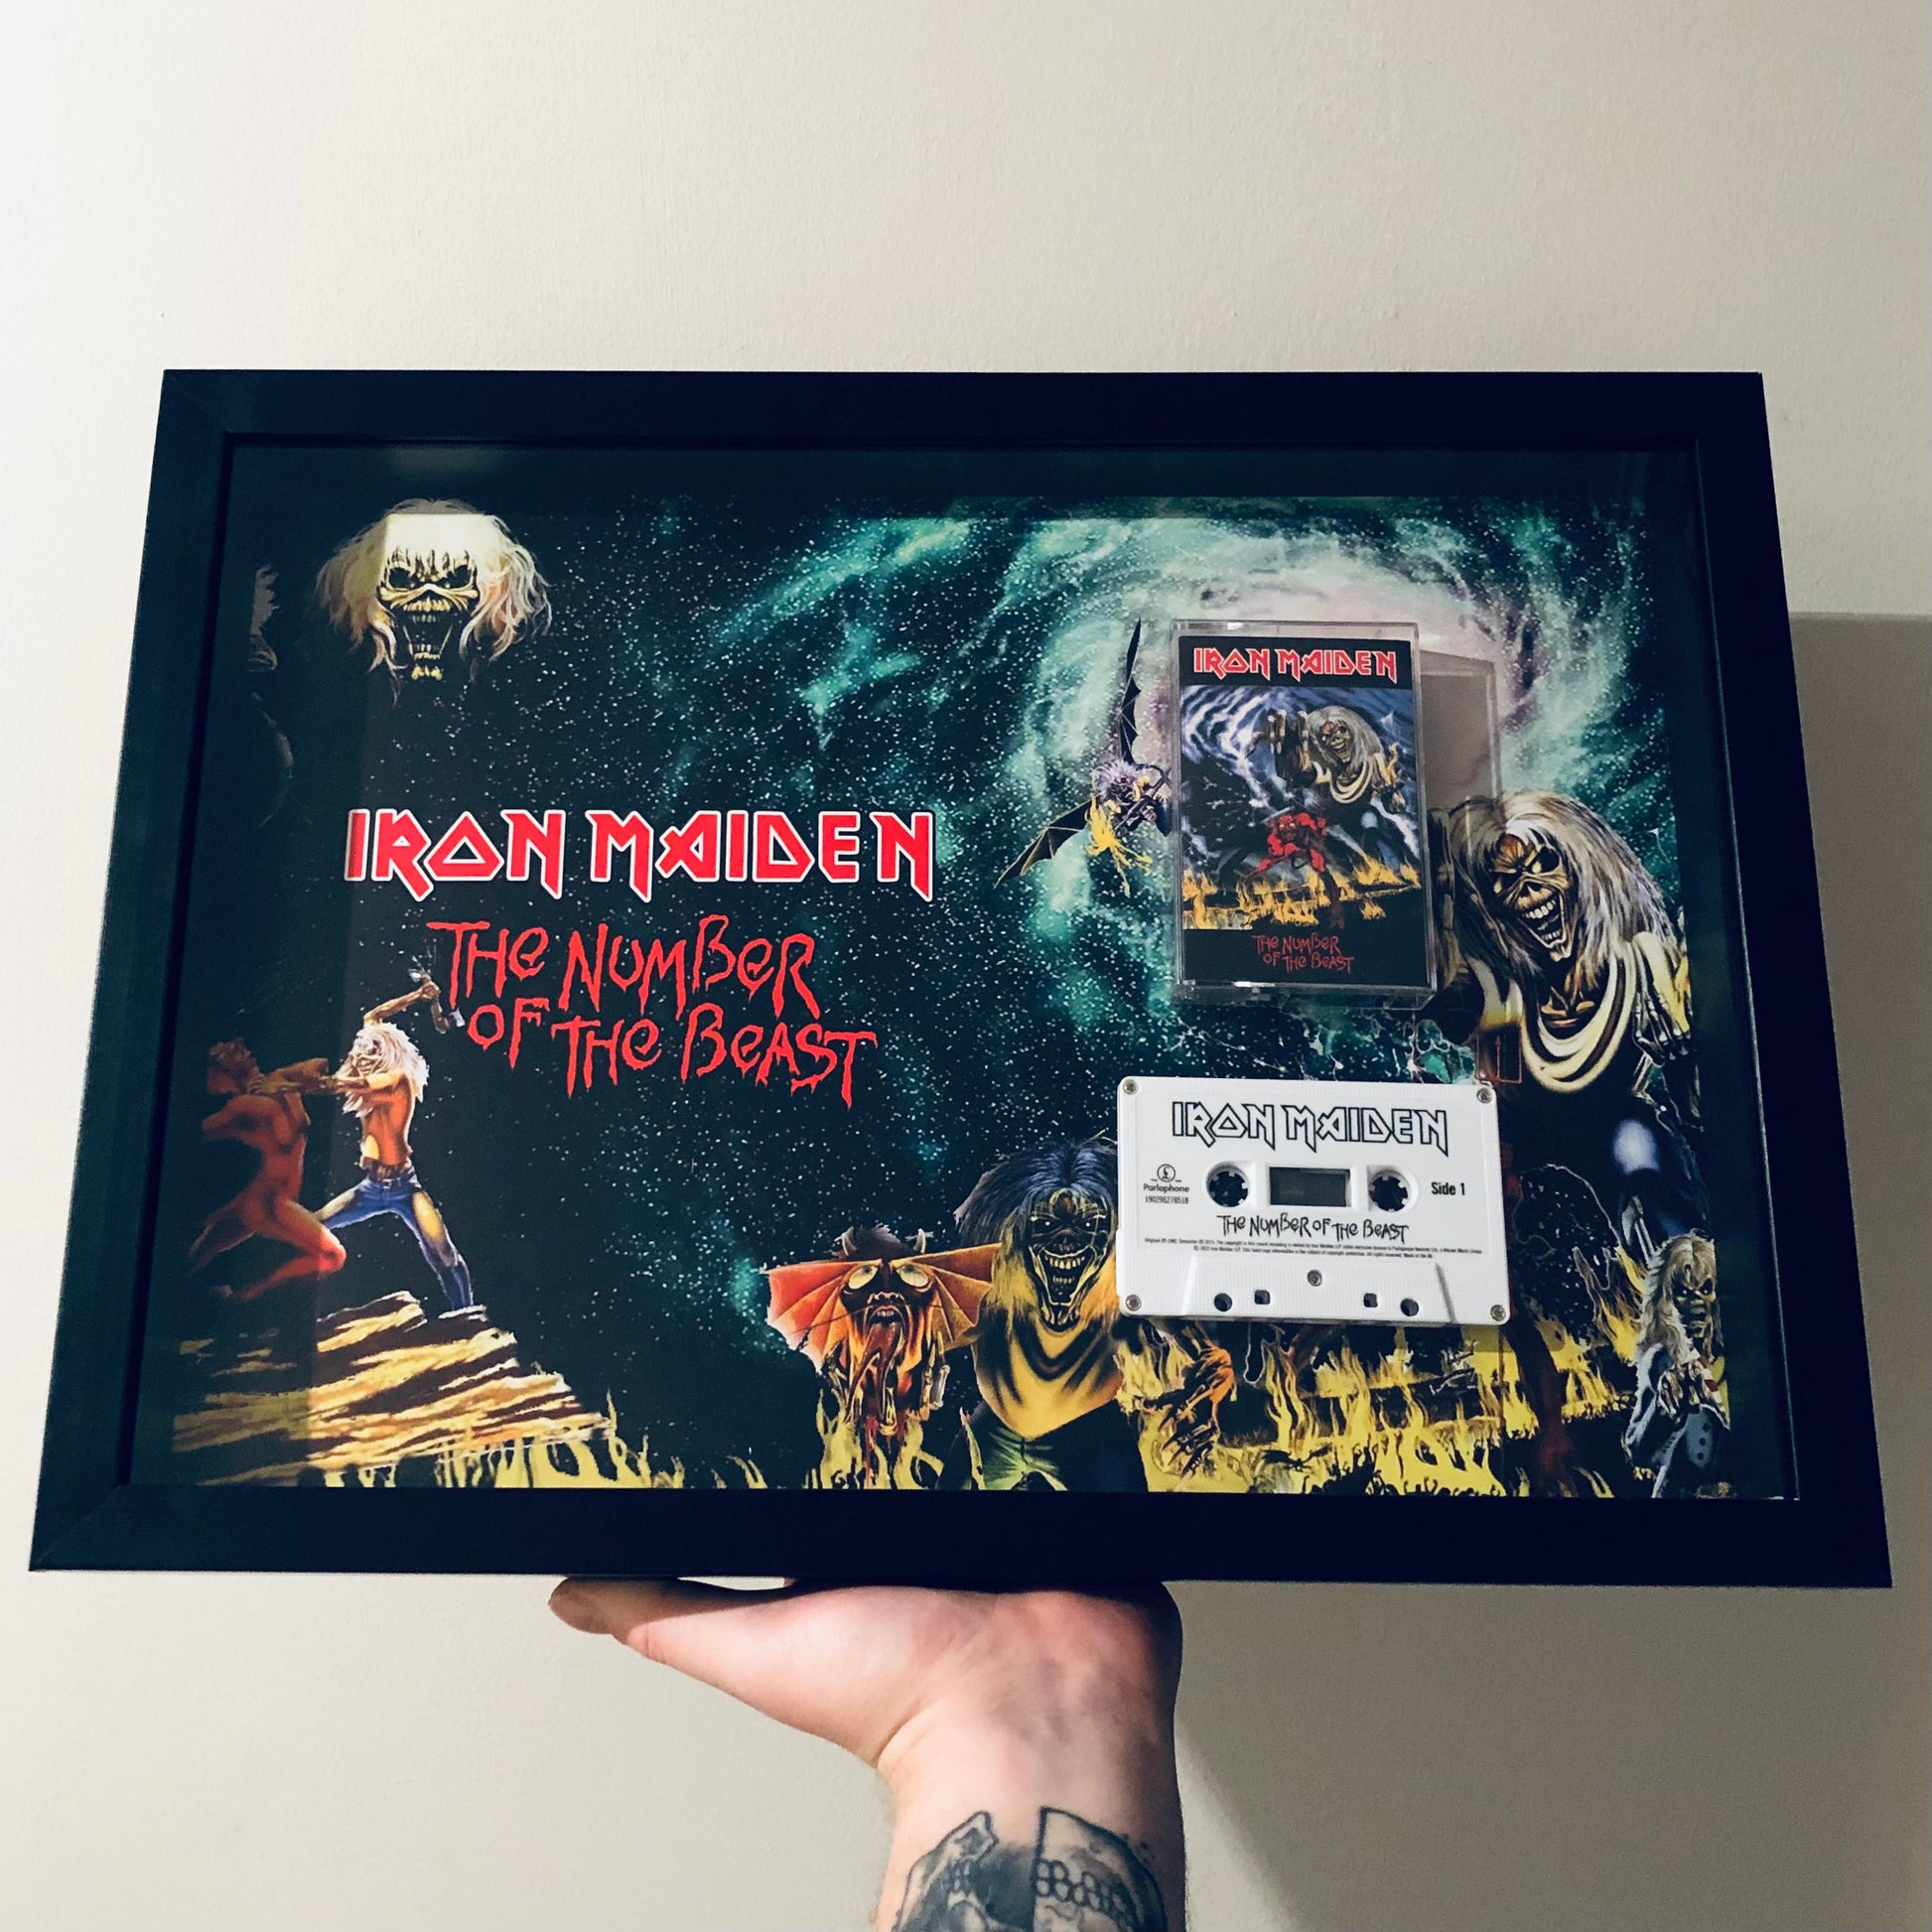 Iron Maiden - Number of the beast 1982 3D Cassette Frame, Vintage, Music, Band